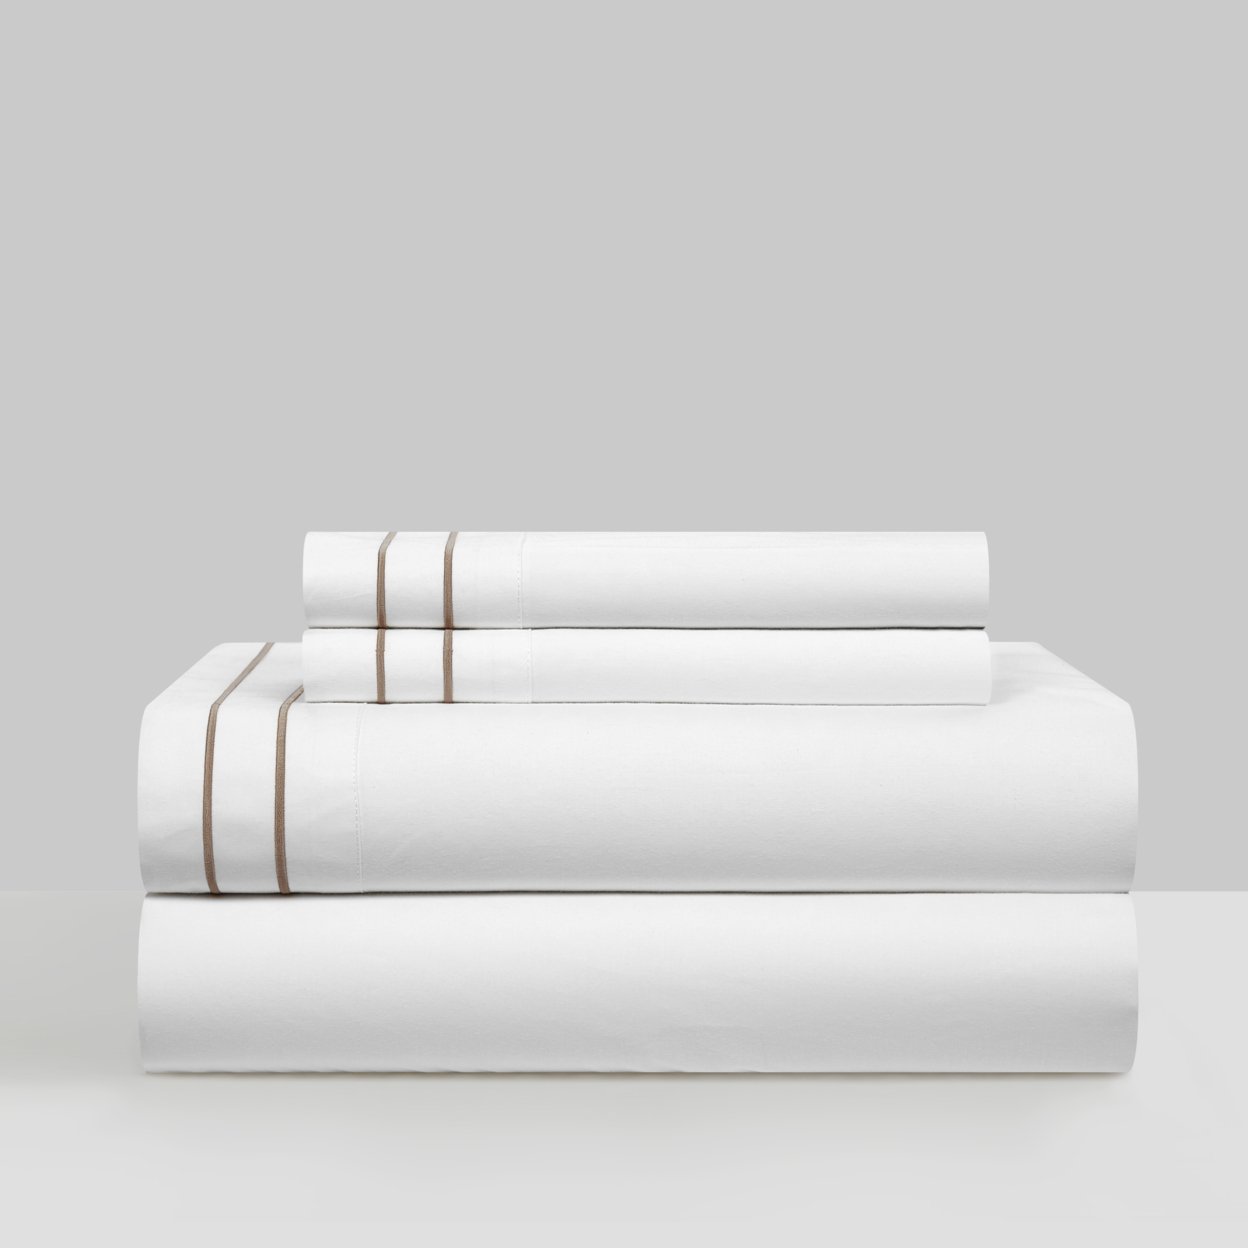 Balensia 4 Piece Organic Cotton Sheet Set Solid White With Dual Stripe Embroidery - Beige, King